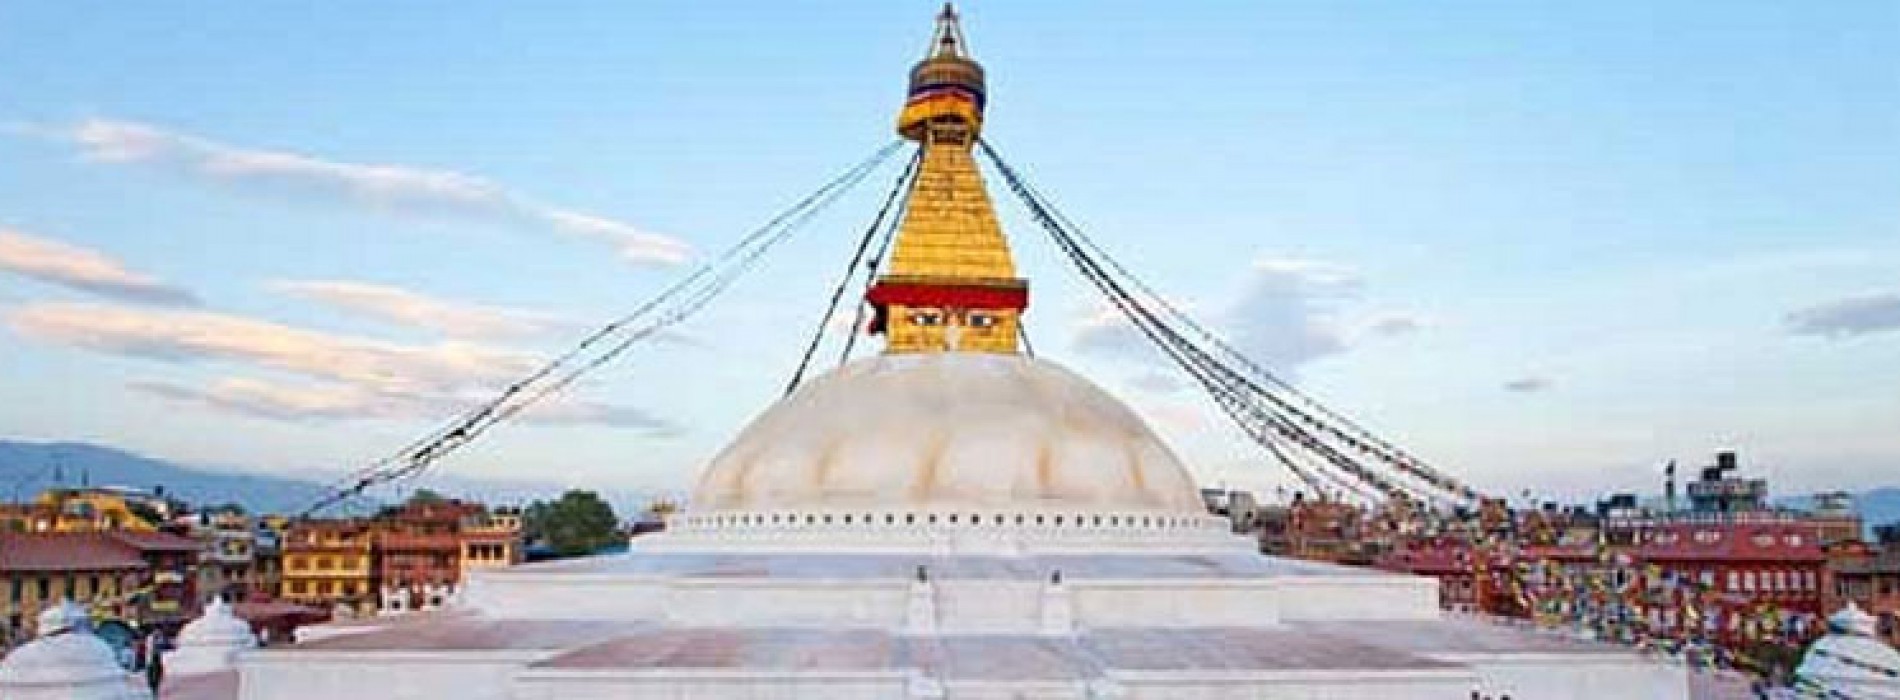 Nepal looks ahead to restore tourism